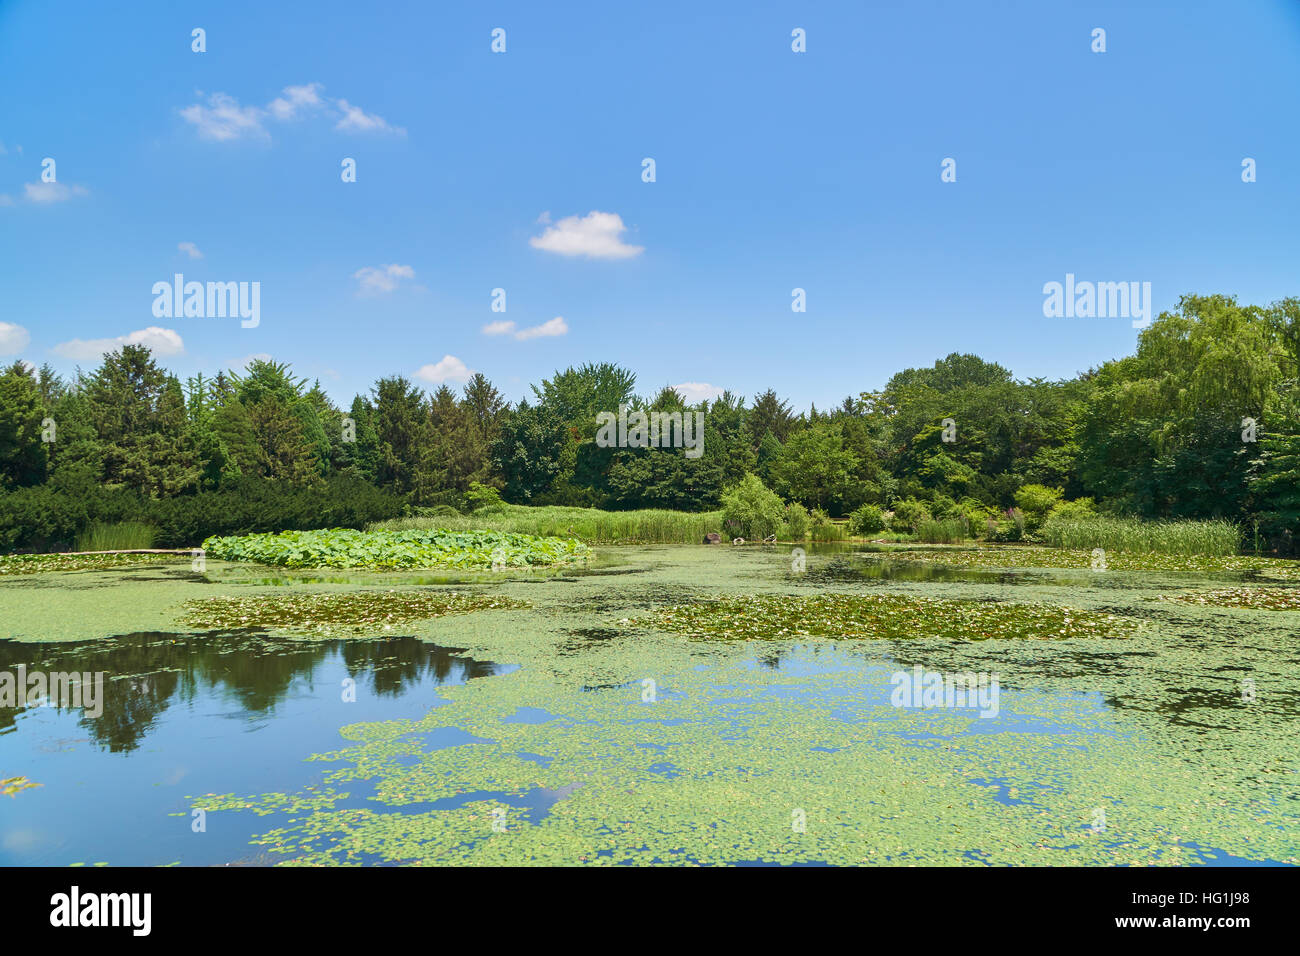 Landscape with big pond and trees in a sunny day in summer Stock Photo